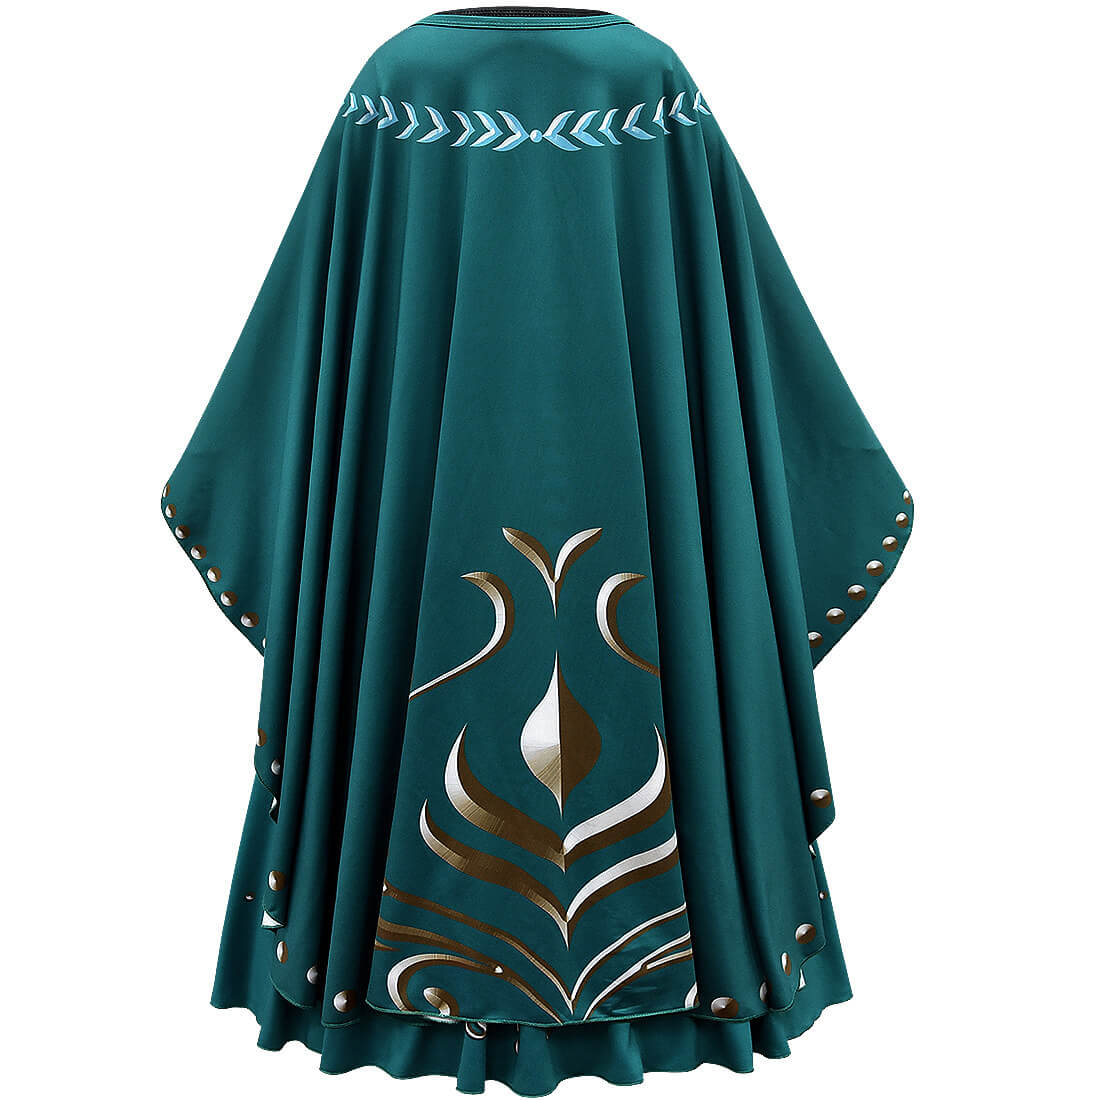 Queen Anna Costume Kids Princess Anna Cosplay Dress with Cloak Role Play Outfit